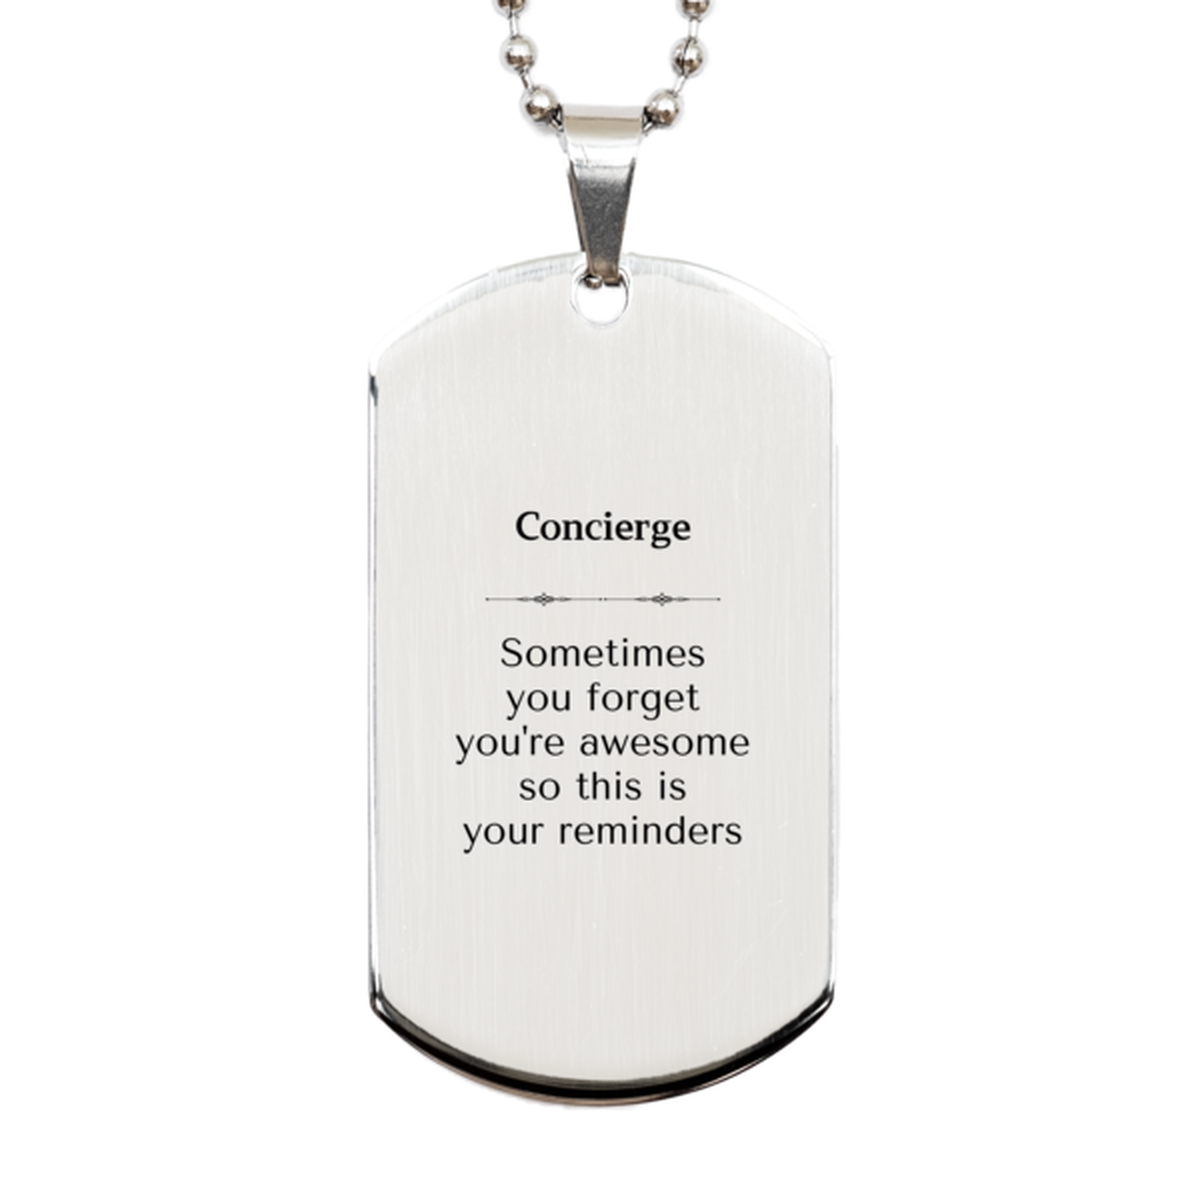 Sentimental Concierge Silver Dog Tag, Concierge Sometimes you forget you're awesome so this is your reminders, Graduation Christmas Birthday Gifts for Concierge, Men, Women, Coworkers